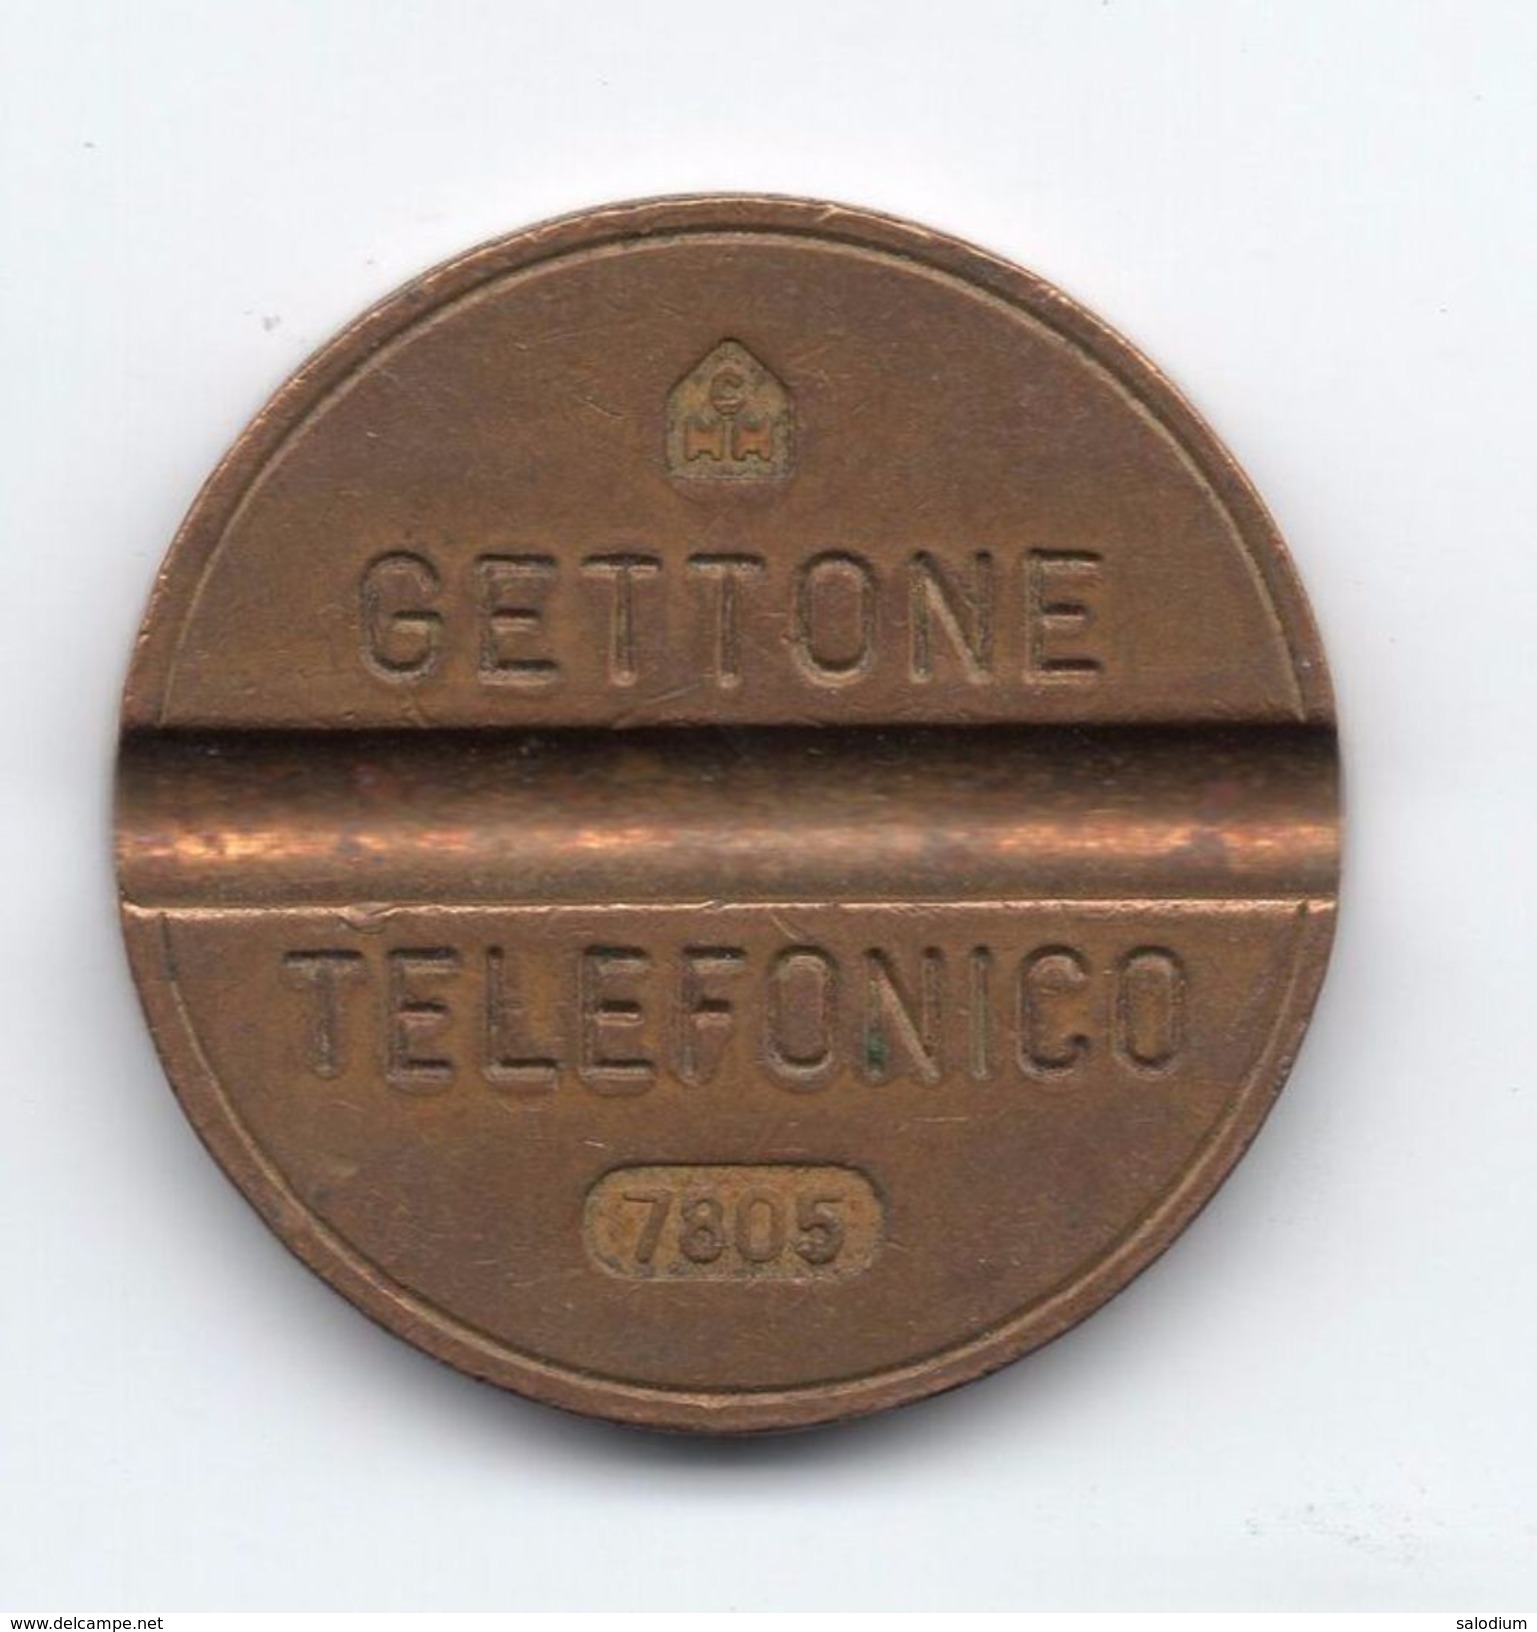 Gettone Telefonico 7805 Token Telephone - (Id-802) - Professionals/Firms